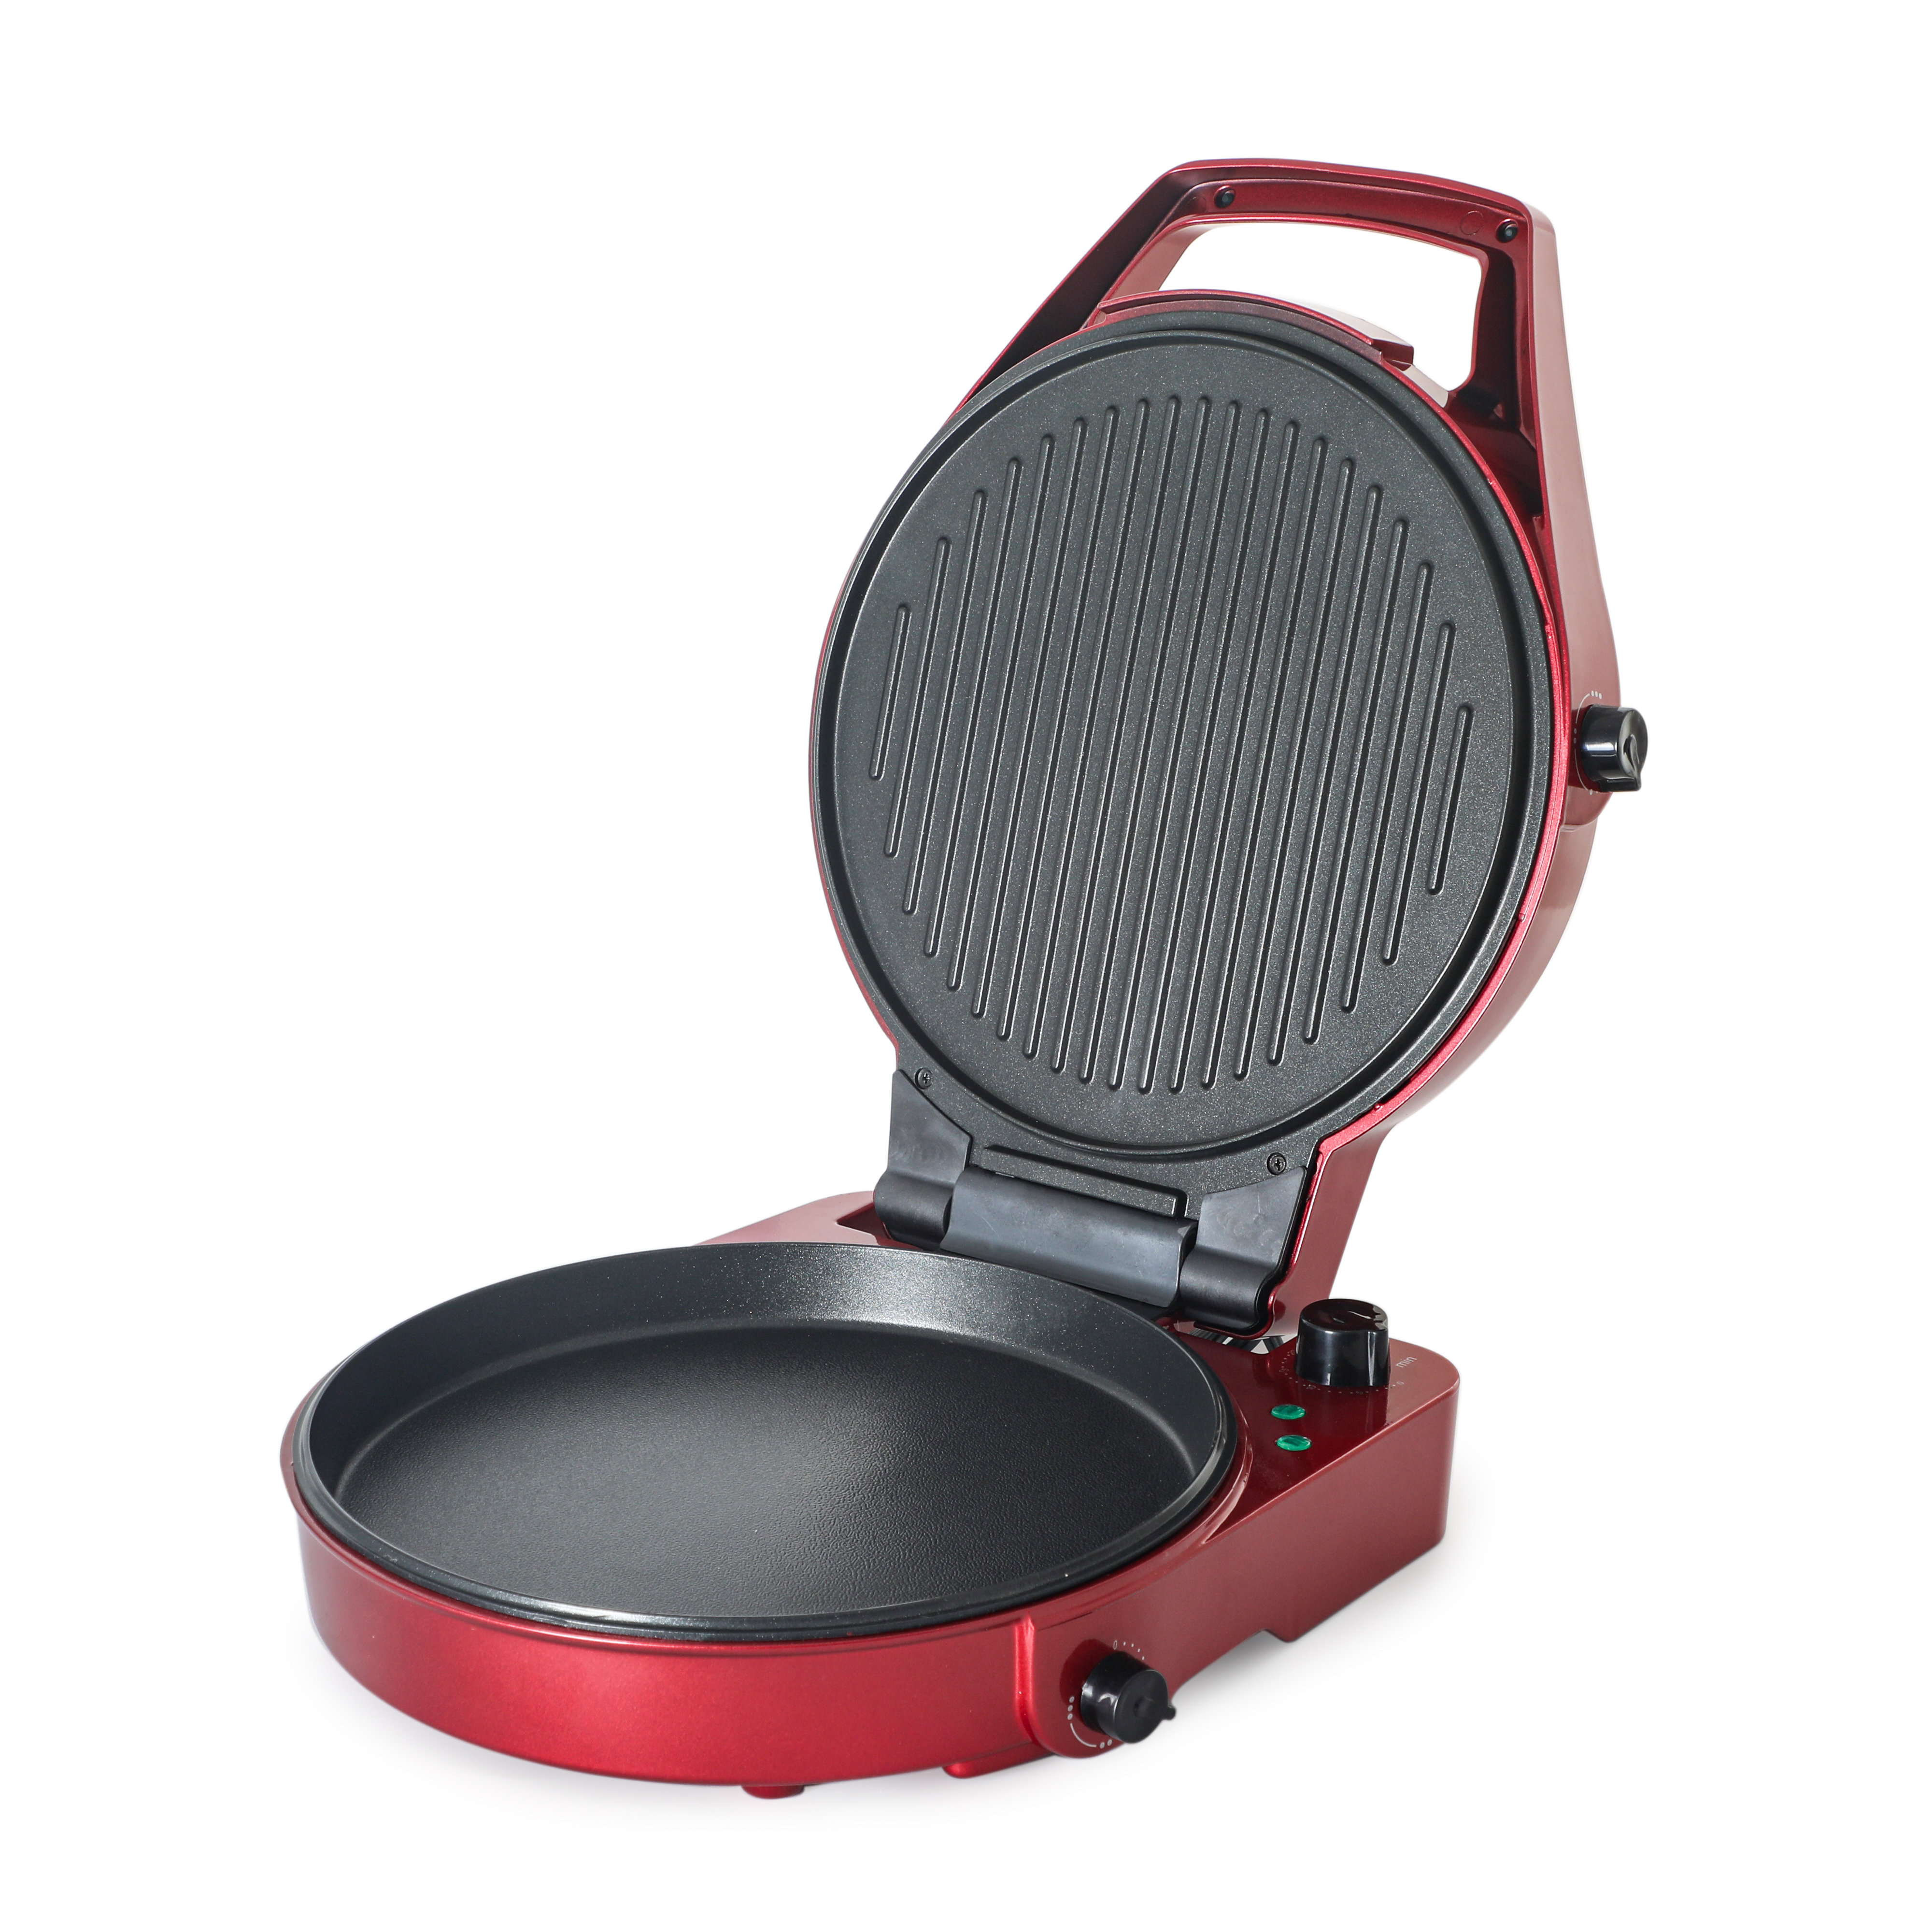 DASH 8” Express Electric Round Griddle for for Pancakes, Cookies